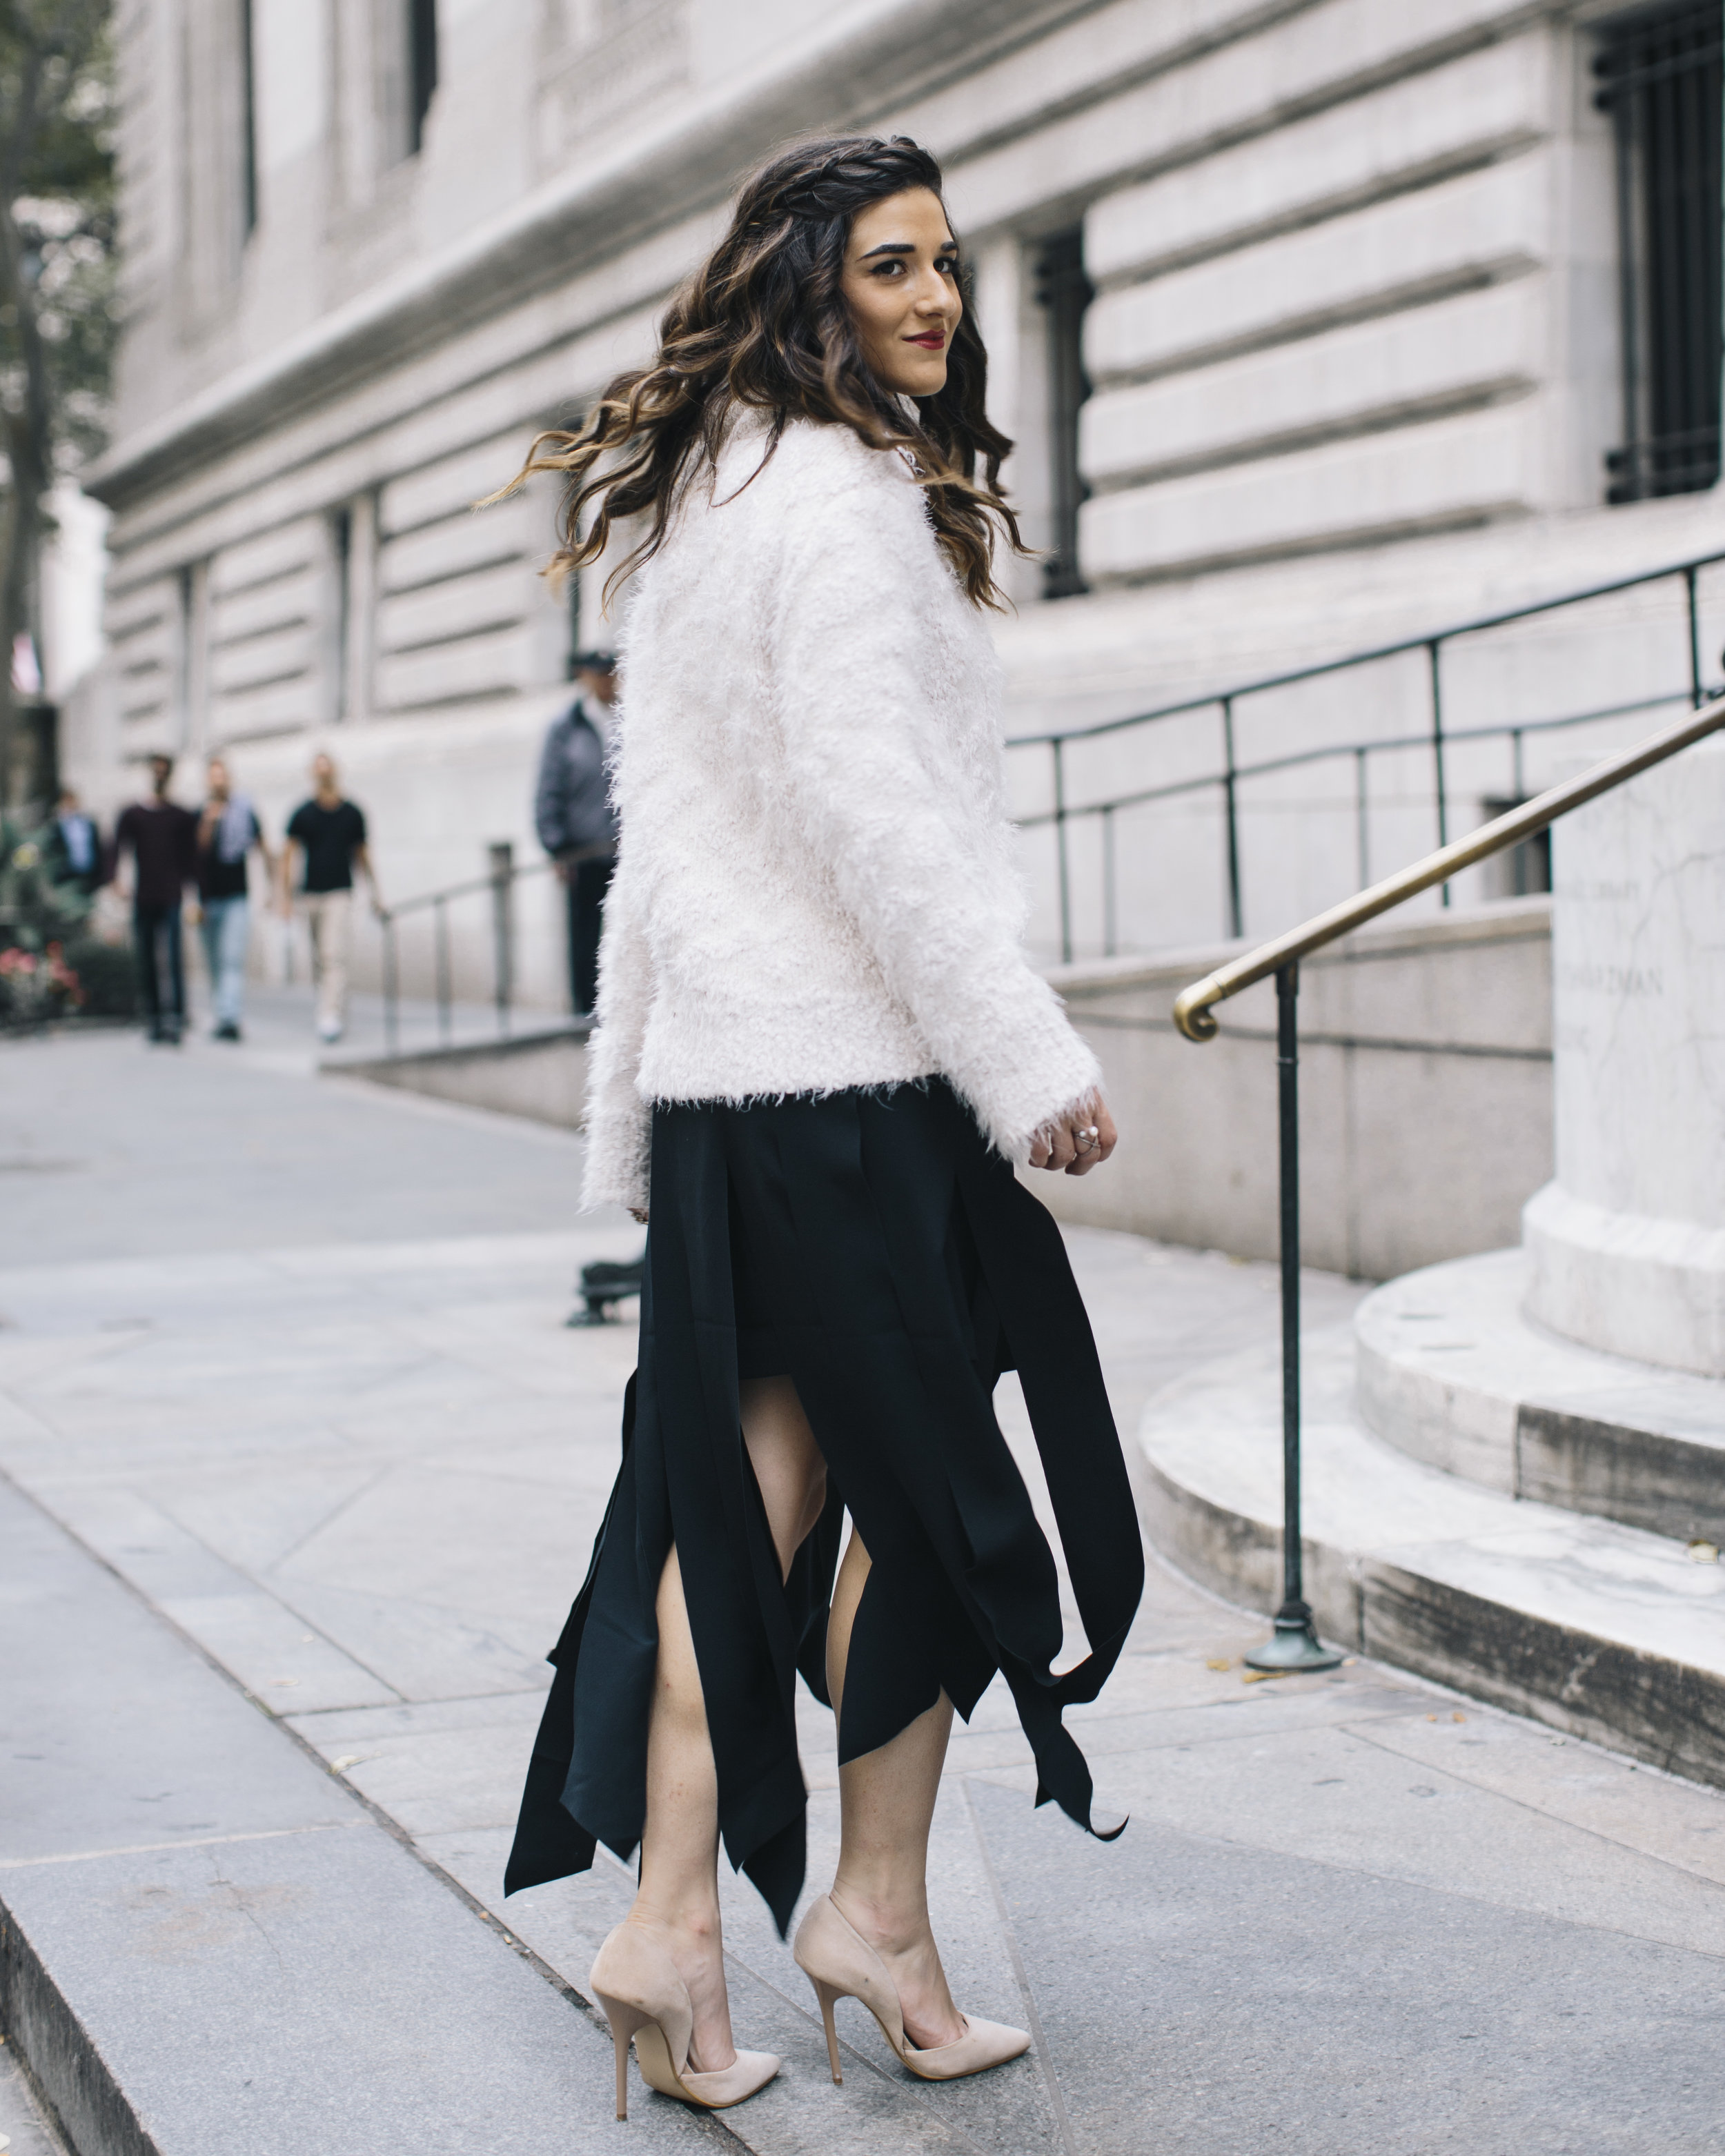 Shopping with Octer Fringe Skirt Louboutins & Love Fashion Blog Esther Santer NYC Street Style Blogger Outfit OOTD Buy Trendy Sweater Cozy Zara Steve Madden Nude Heels Neutral Colors Navy White Winter New York City Beautiful Photoshoot Hair Girl Women.jpg